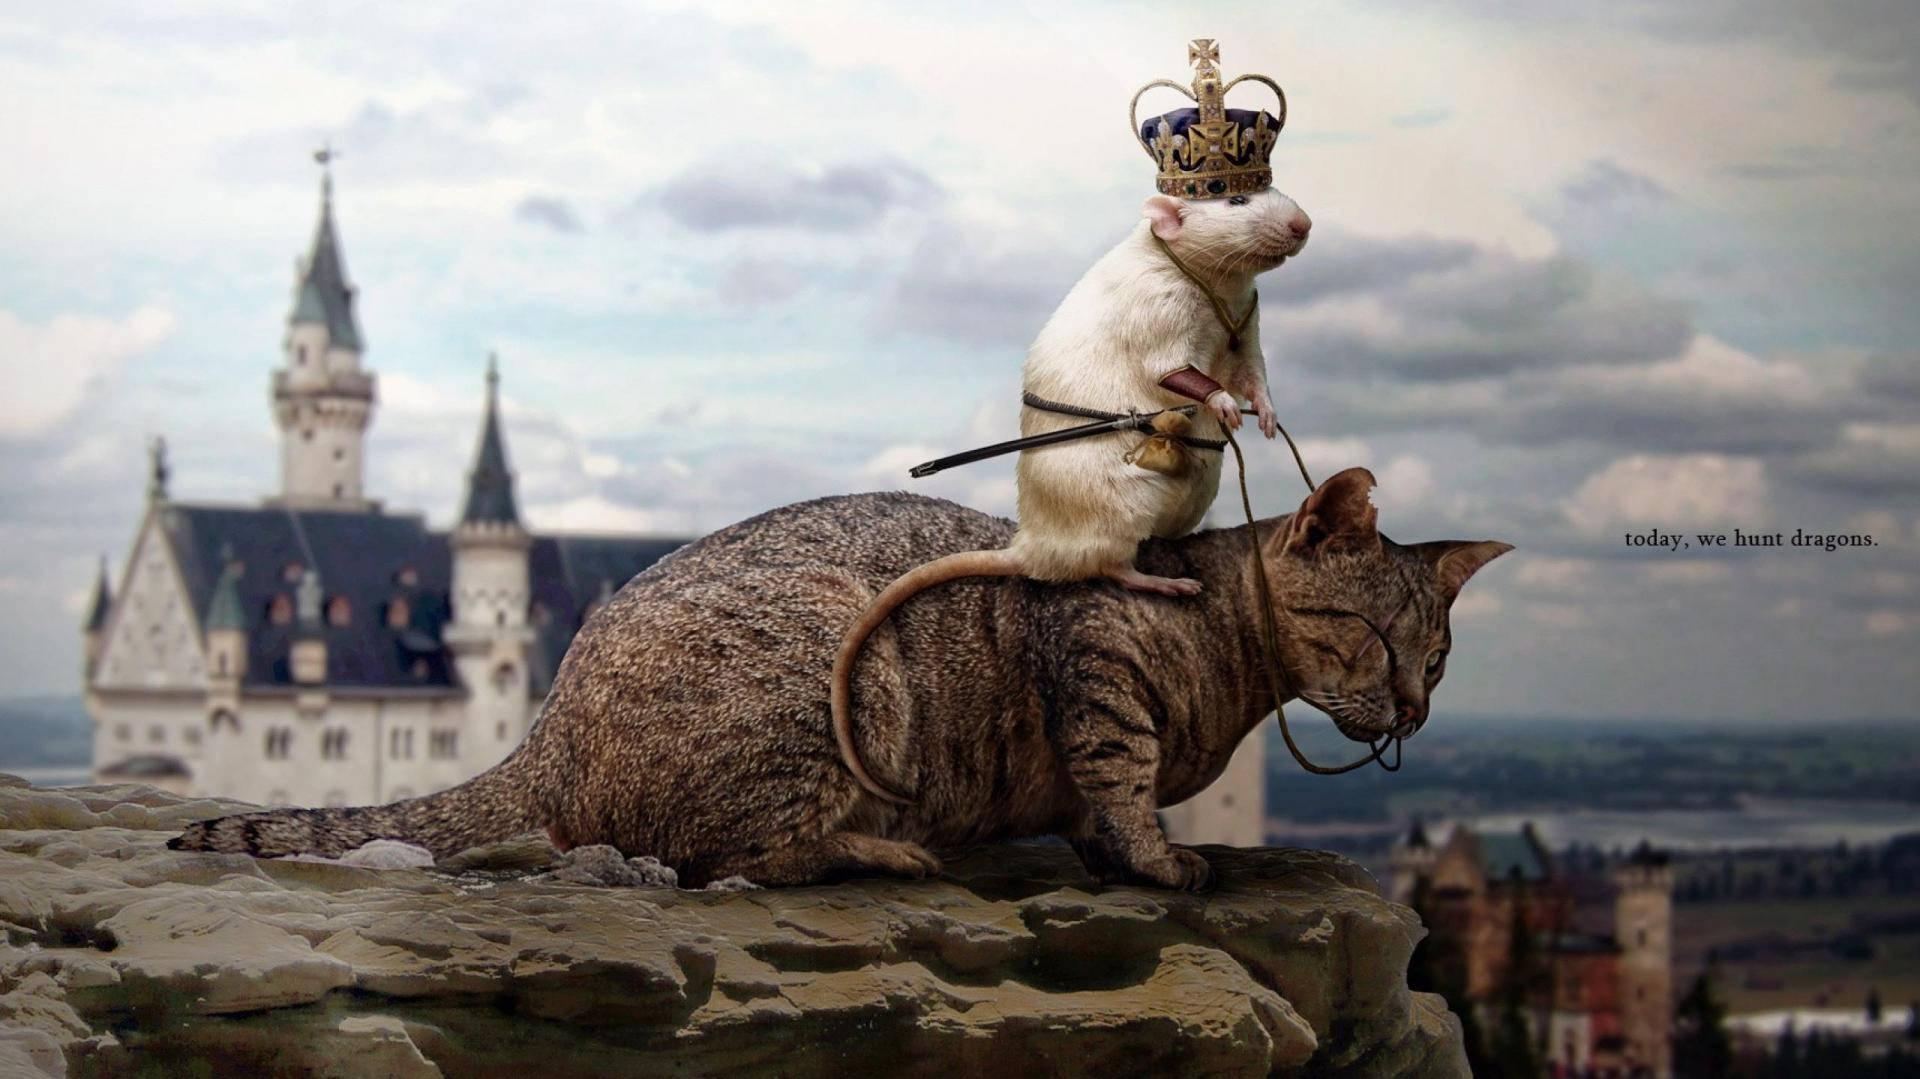 Unlikely Friends Amusing Snapshot Of A Mouse Riding On